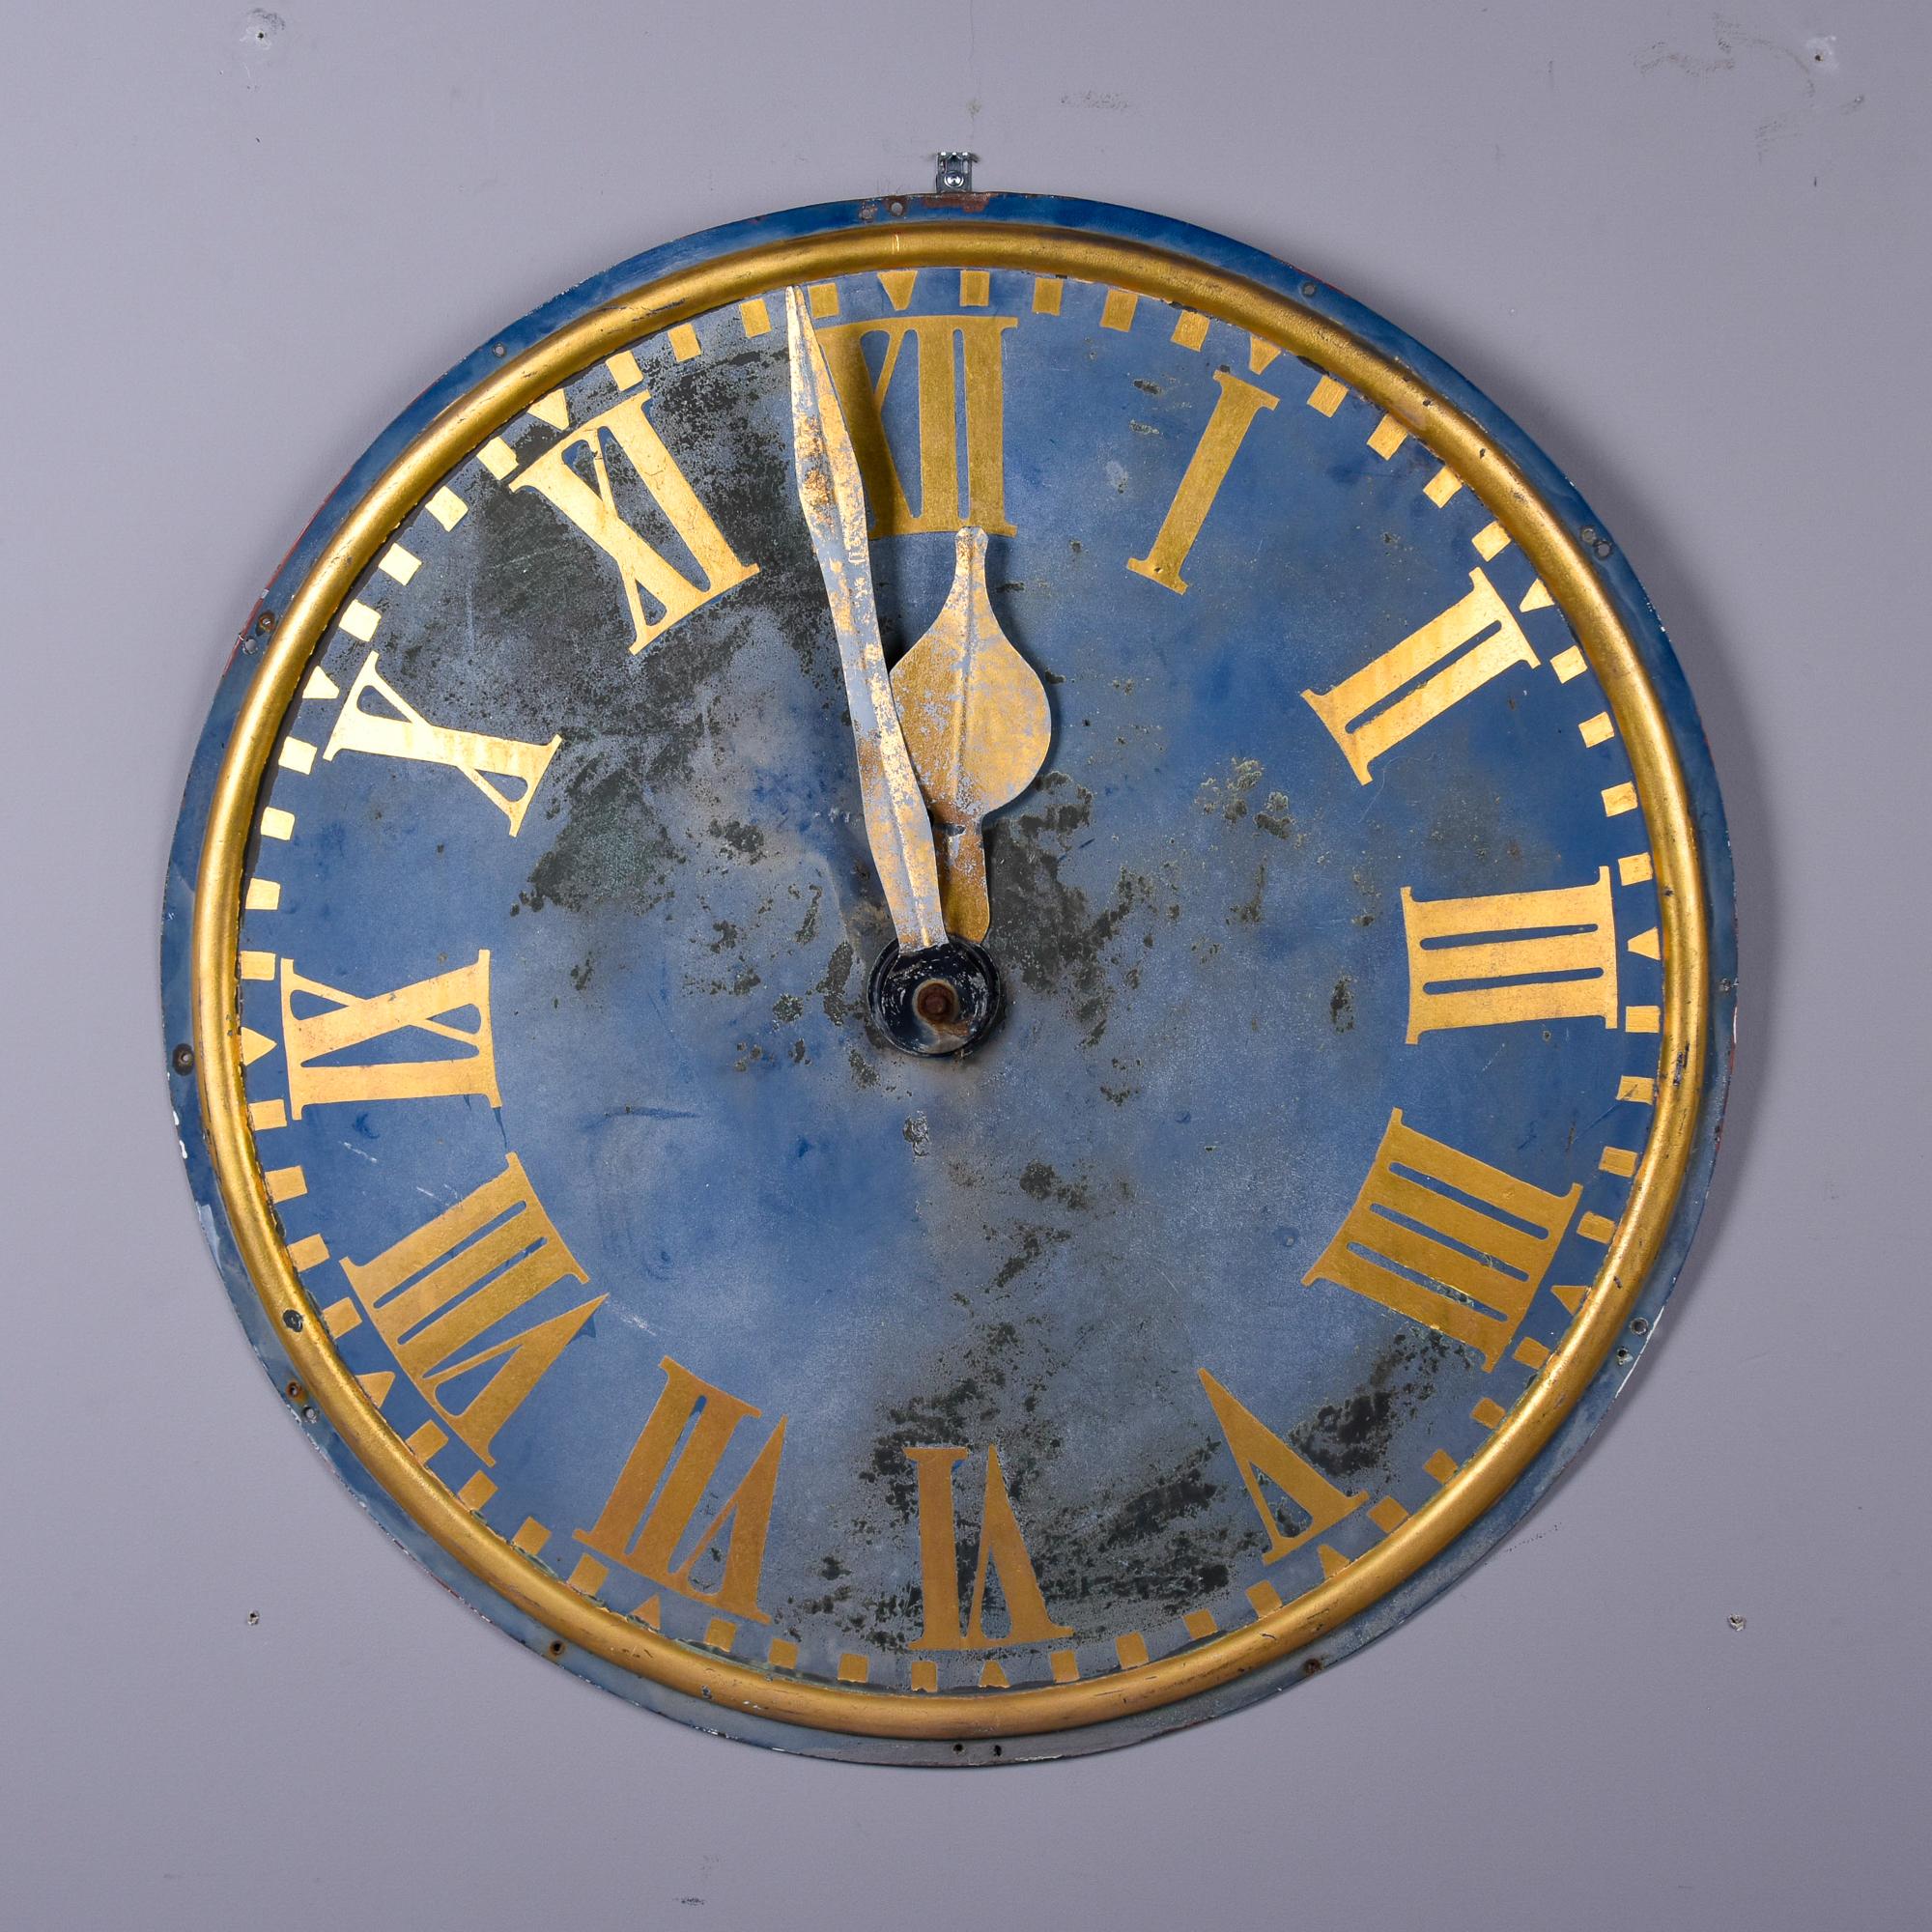 Found in France, this circa 1900s metal clock face with gray blue paint makes a great wall display. Original metal clock face is 36” diameter and appears to have had the gold paint touched up - we found it as shown. Unknown maker.